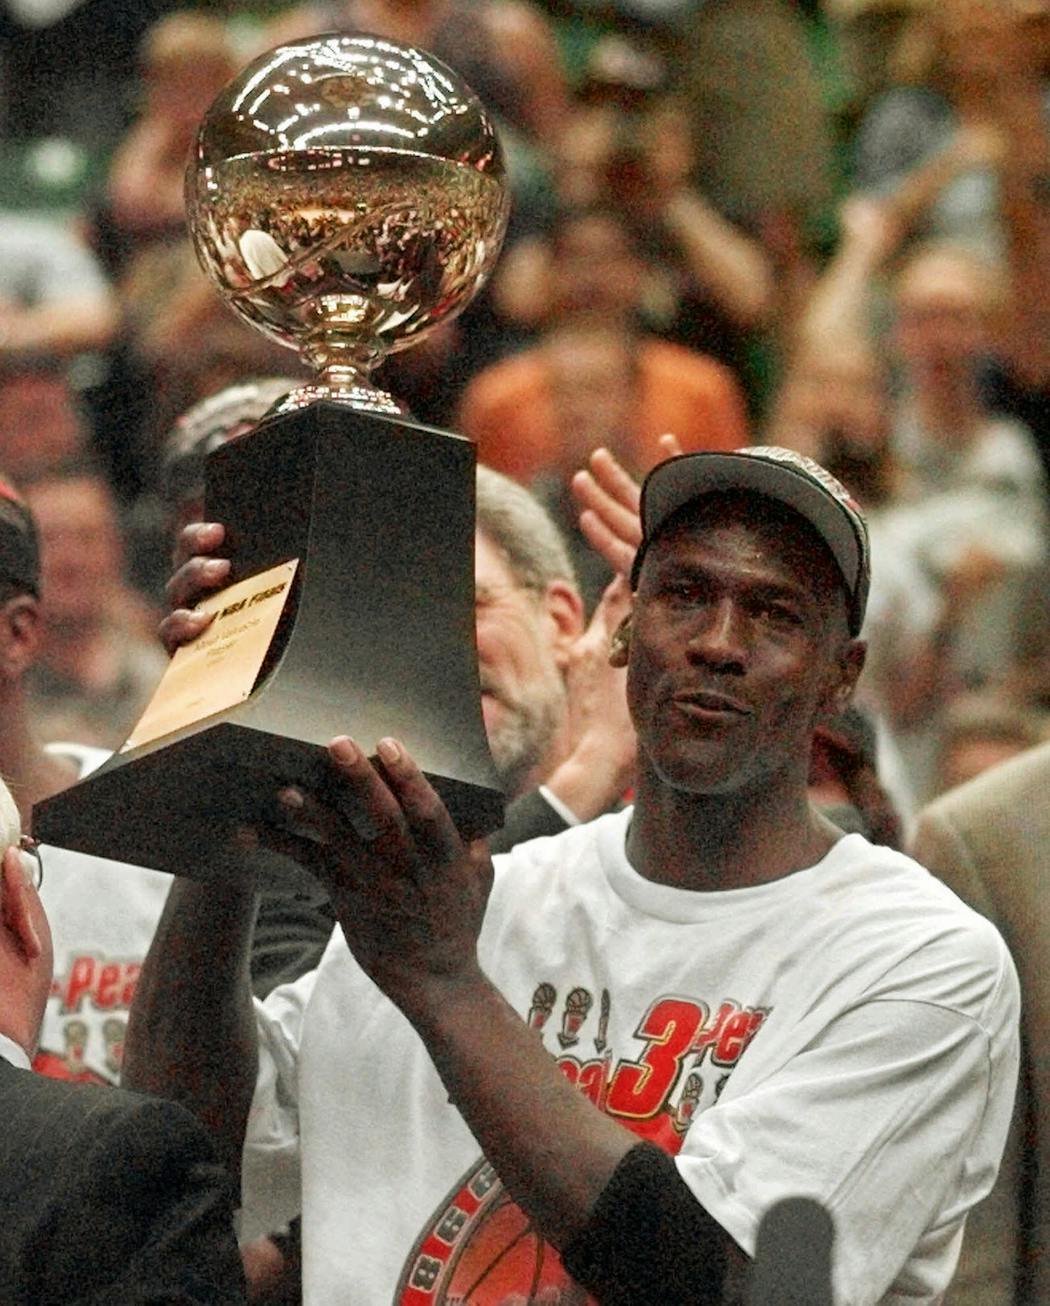 Michael Jordan holds the MVP trophy after the Bulls defeated the Jazz 87-86 in Game 6 of the 1998 NBA Finals in Salt Lake City.